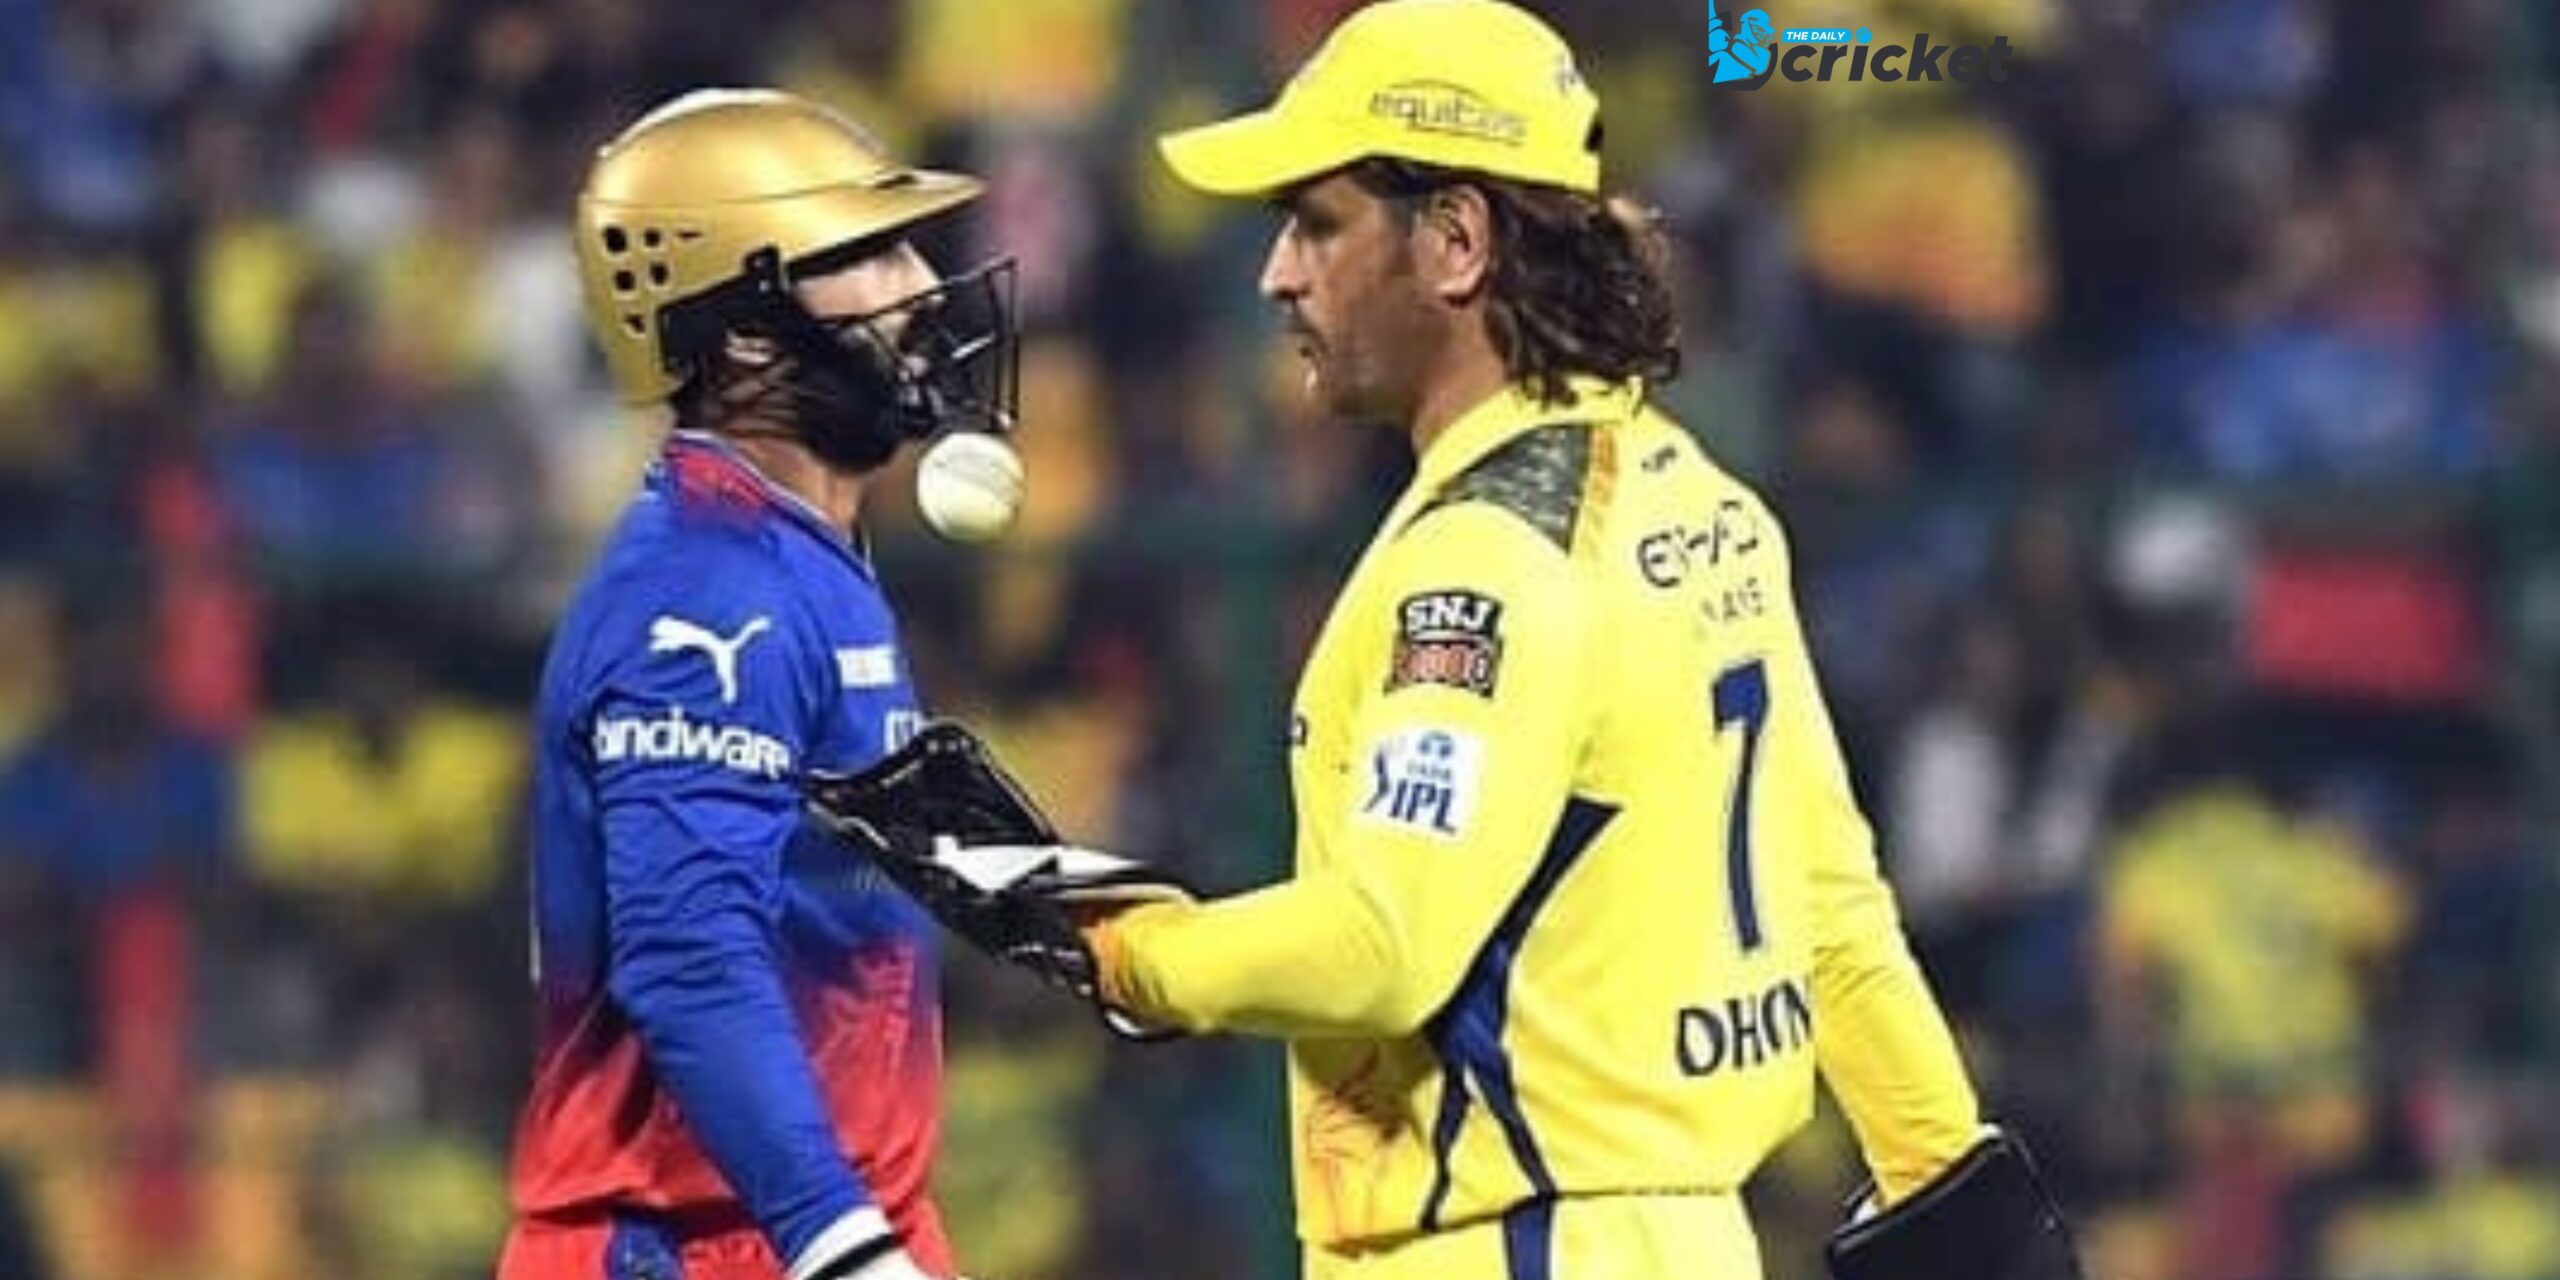 Fans criticise MS Dhoni's'retirement drama' when Dinesh Karthik quietly quits his IPL career after RCB's crushing defeat.